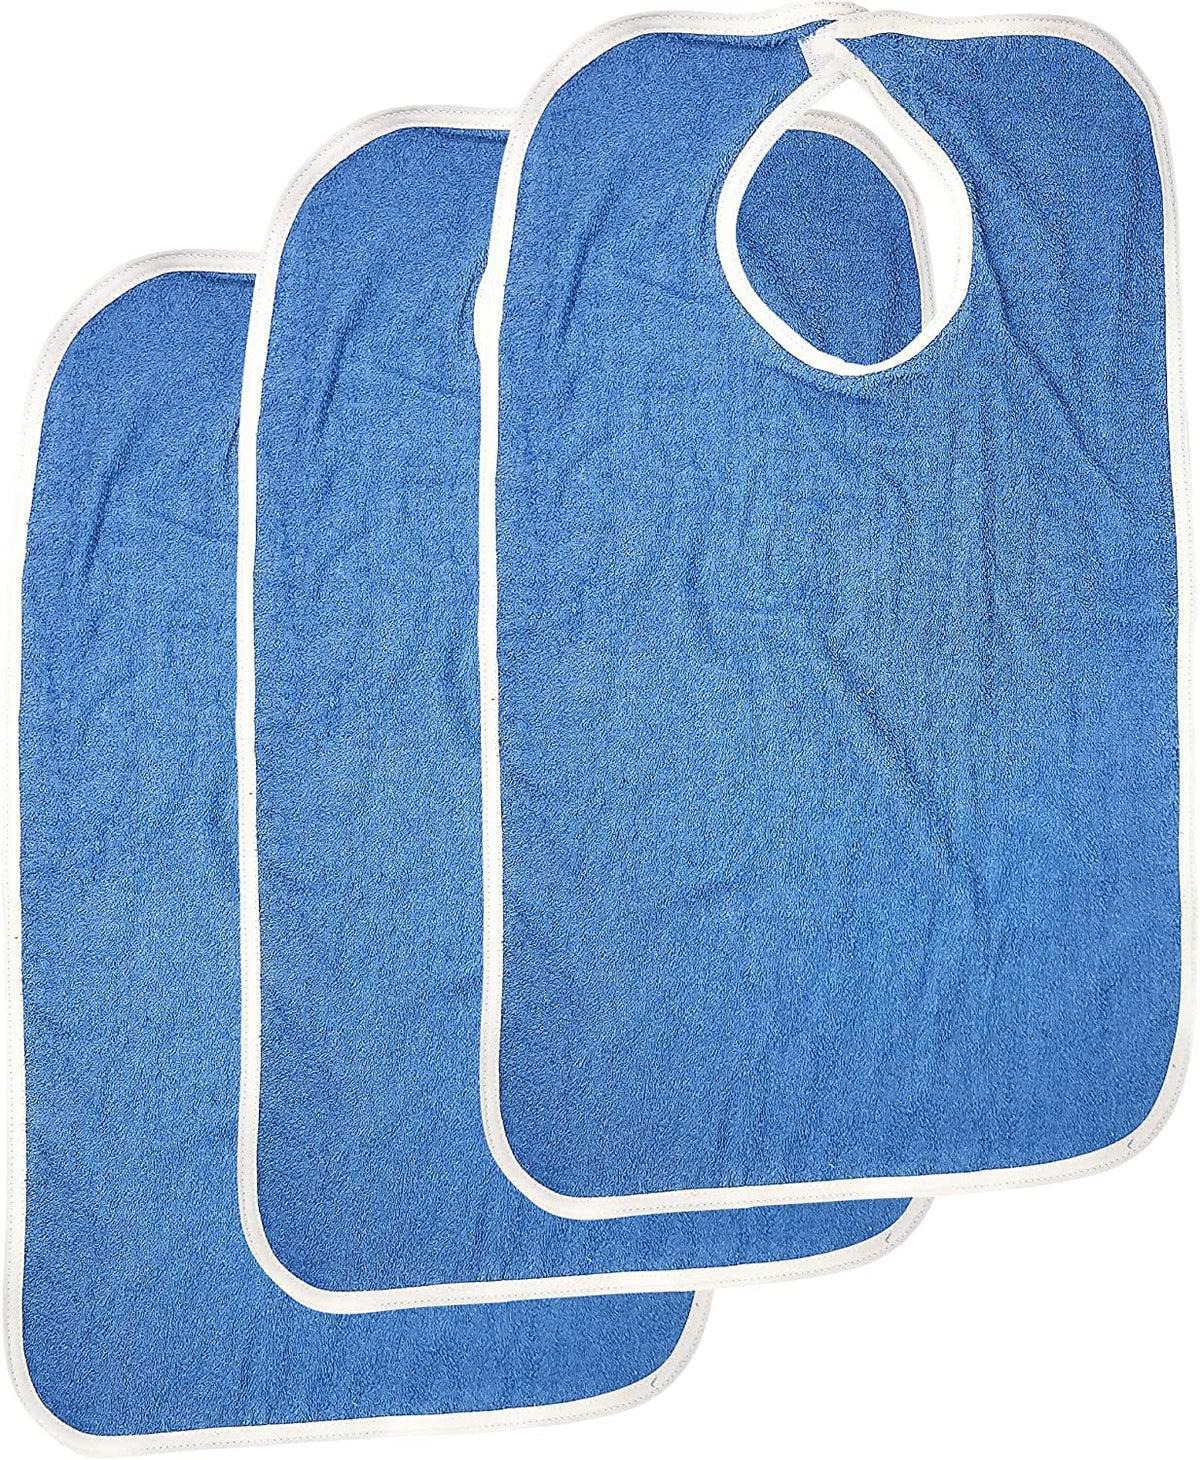 Mars Wellness Terry Adult Bibs 3 Pack - Large 18X30 Terry Cloth Bib for Adults - Elderly, Seniors, Disabled, Blue Clothing Protector for Men or Women - Mars Med Supply